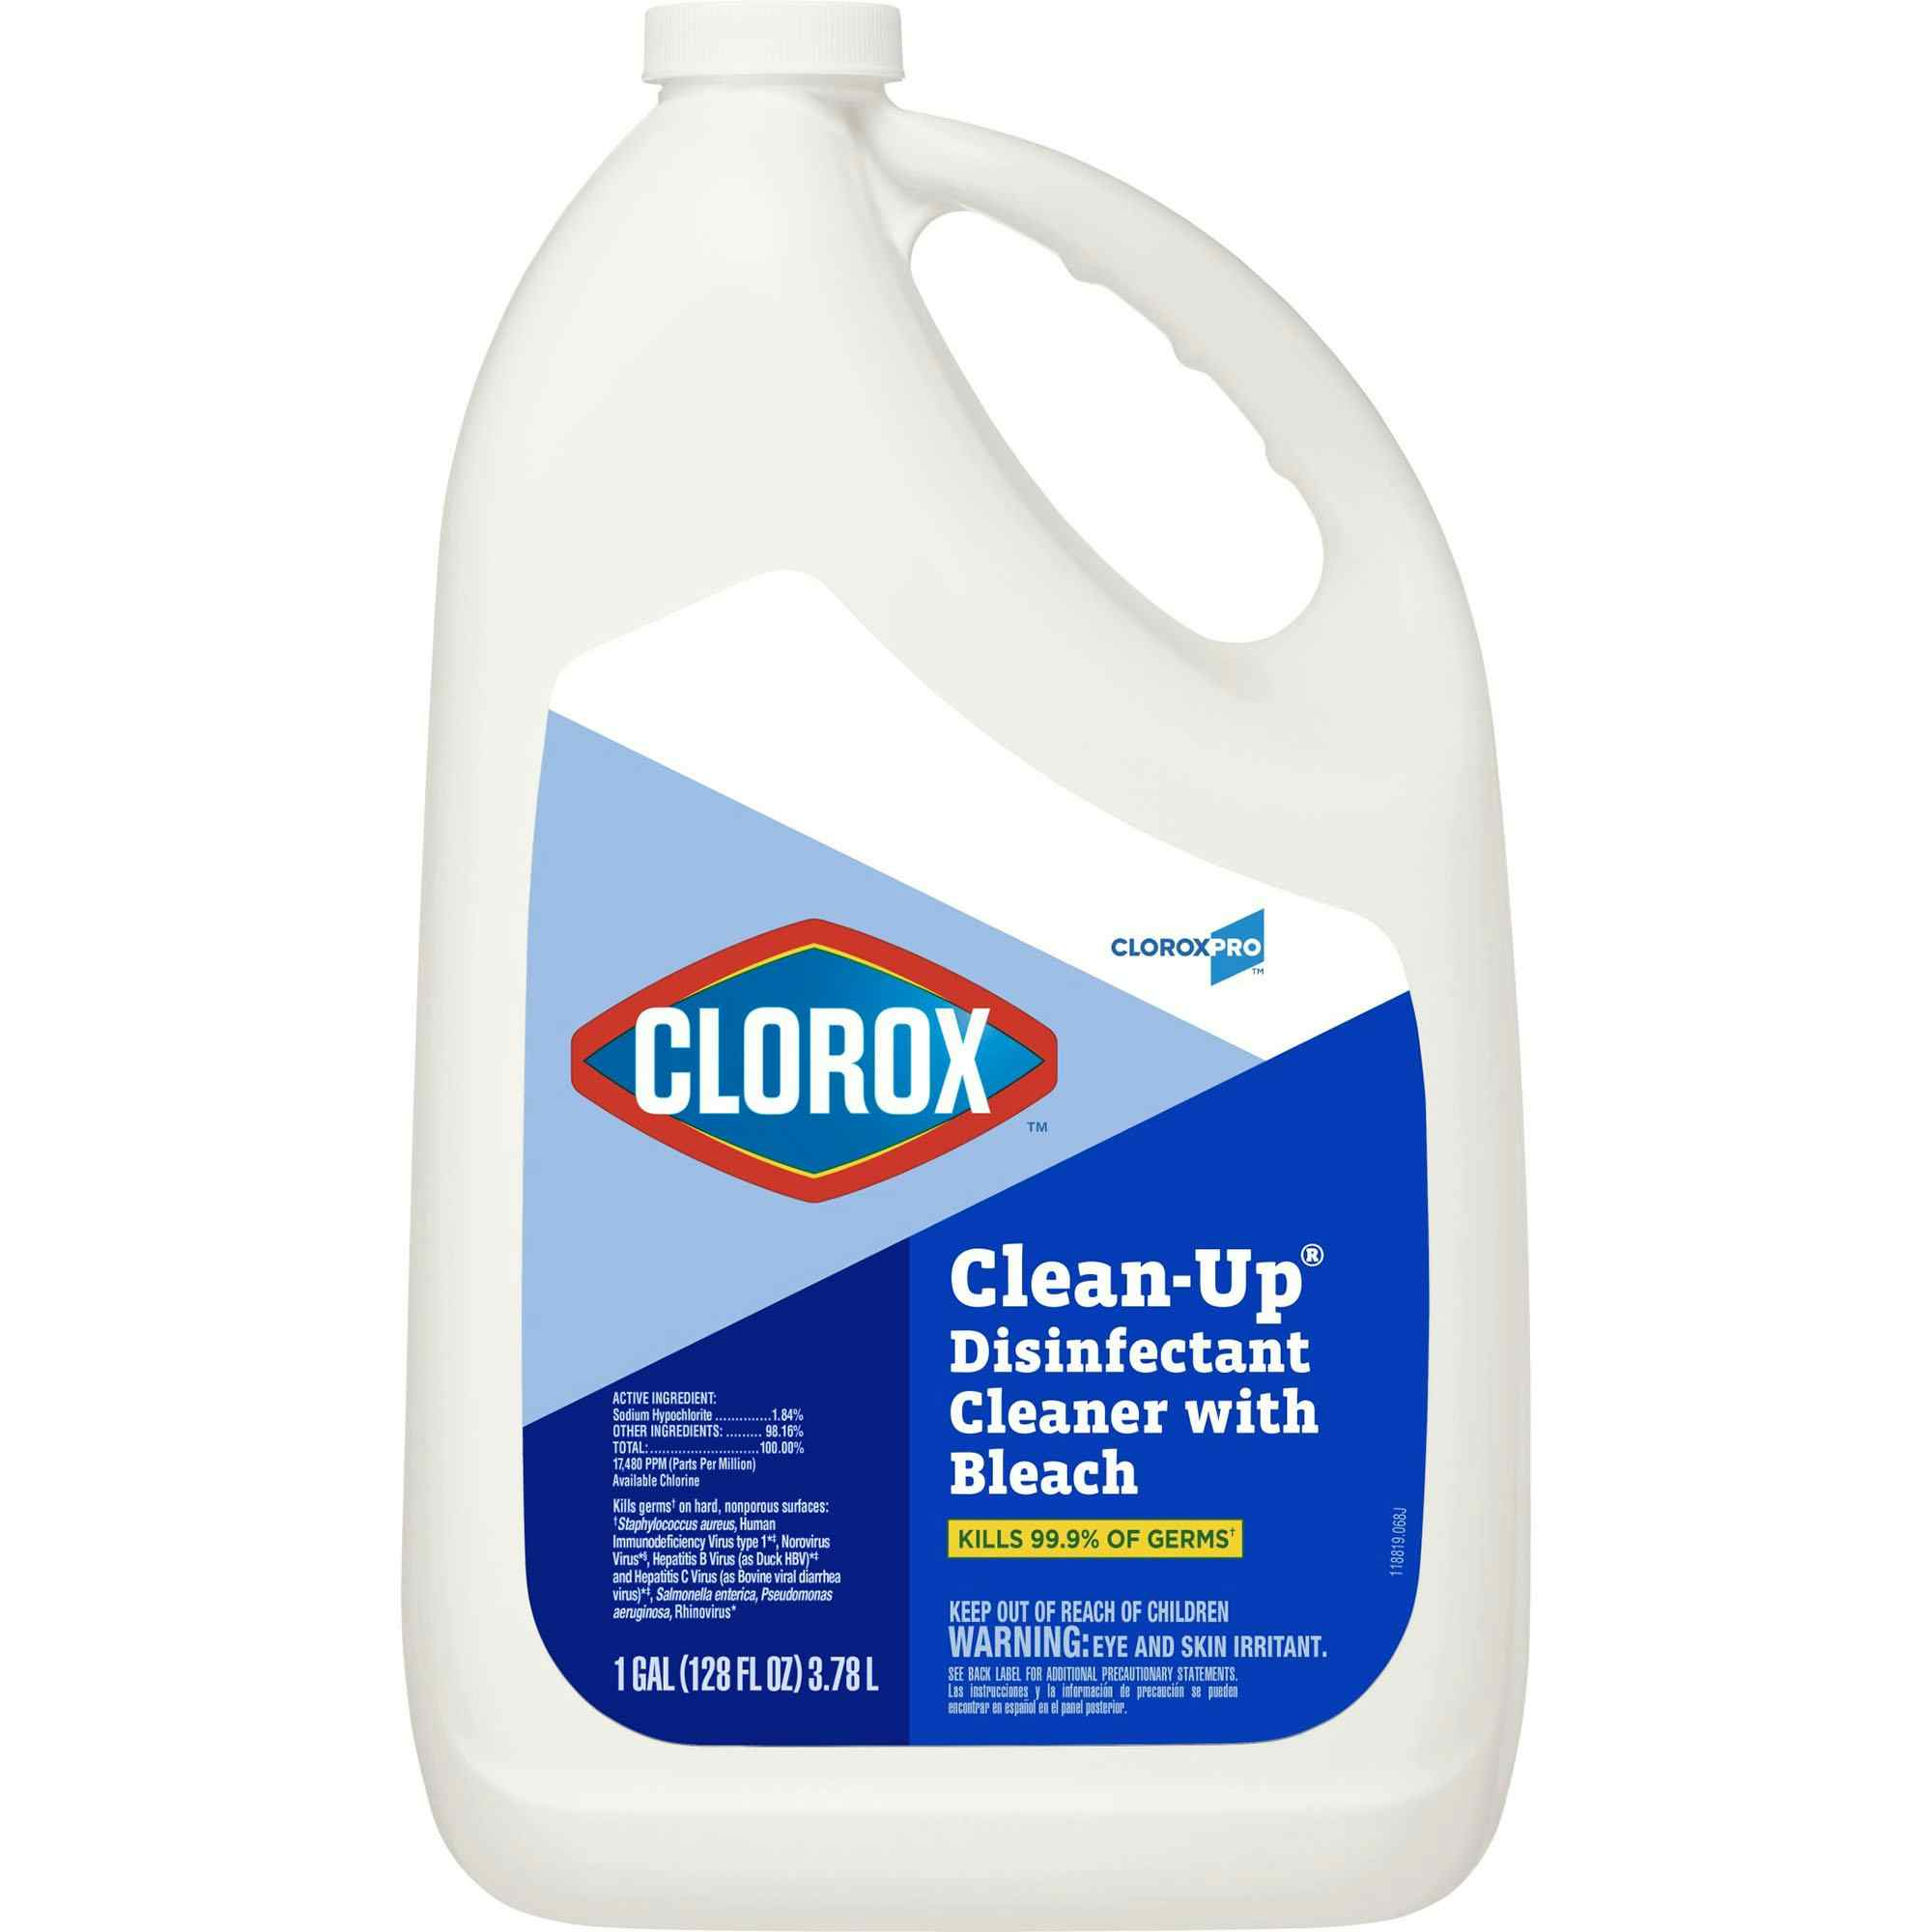 Clorox Clean-Up Disinfectant Cleaner with Bleach, 1 gal., 35420CT, 1 Each